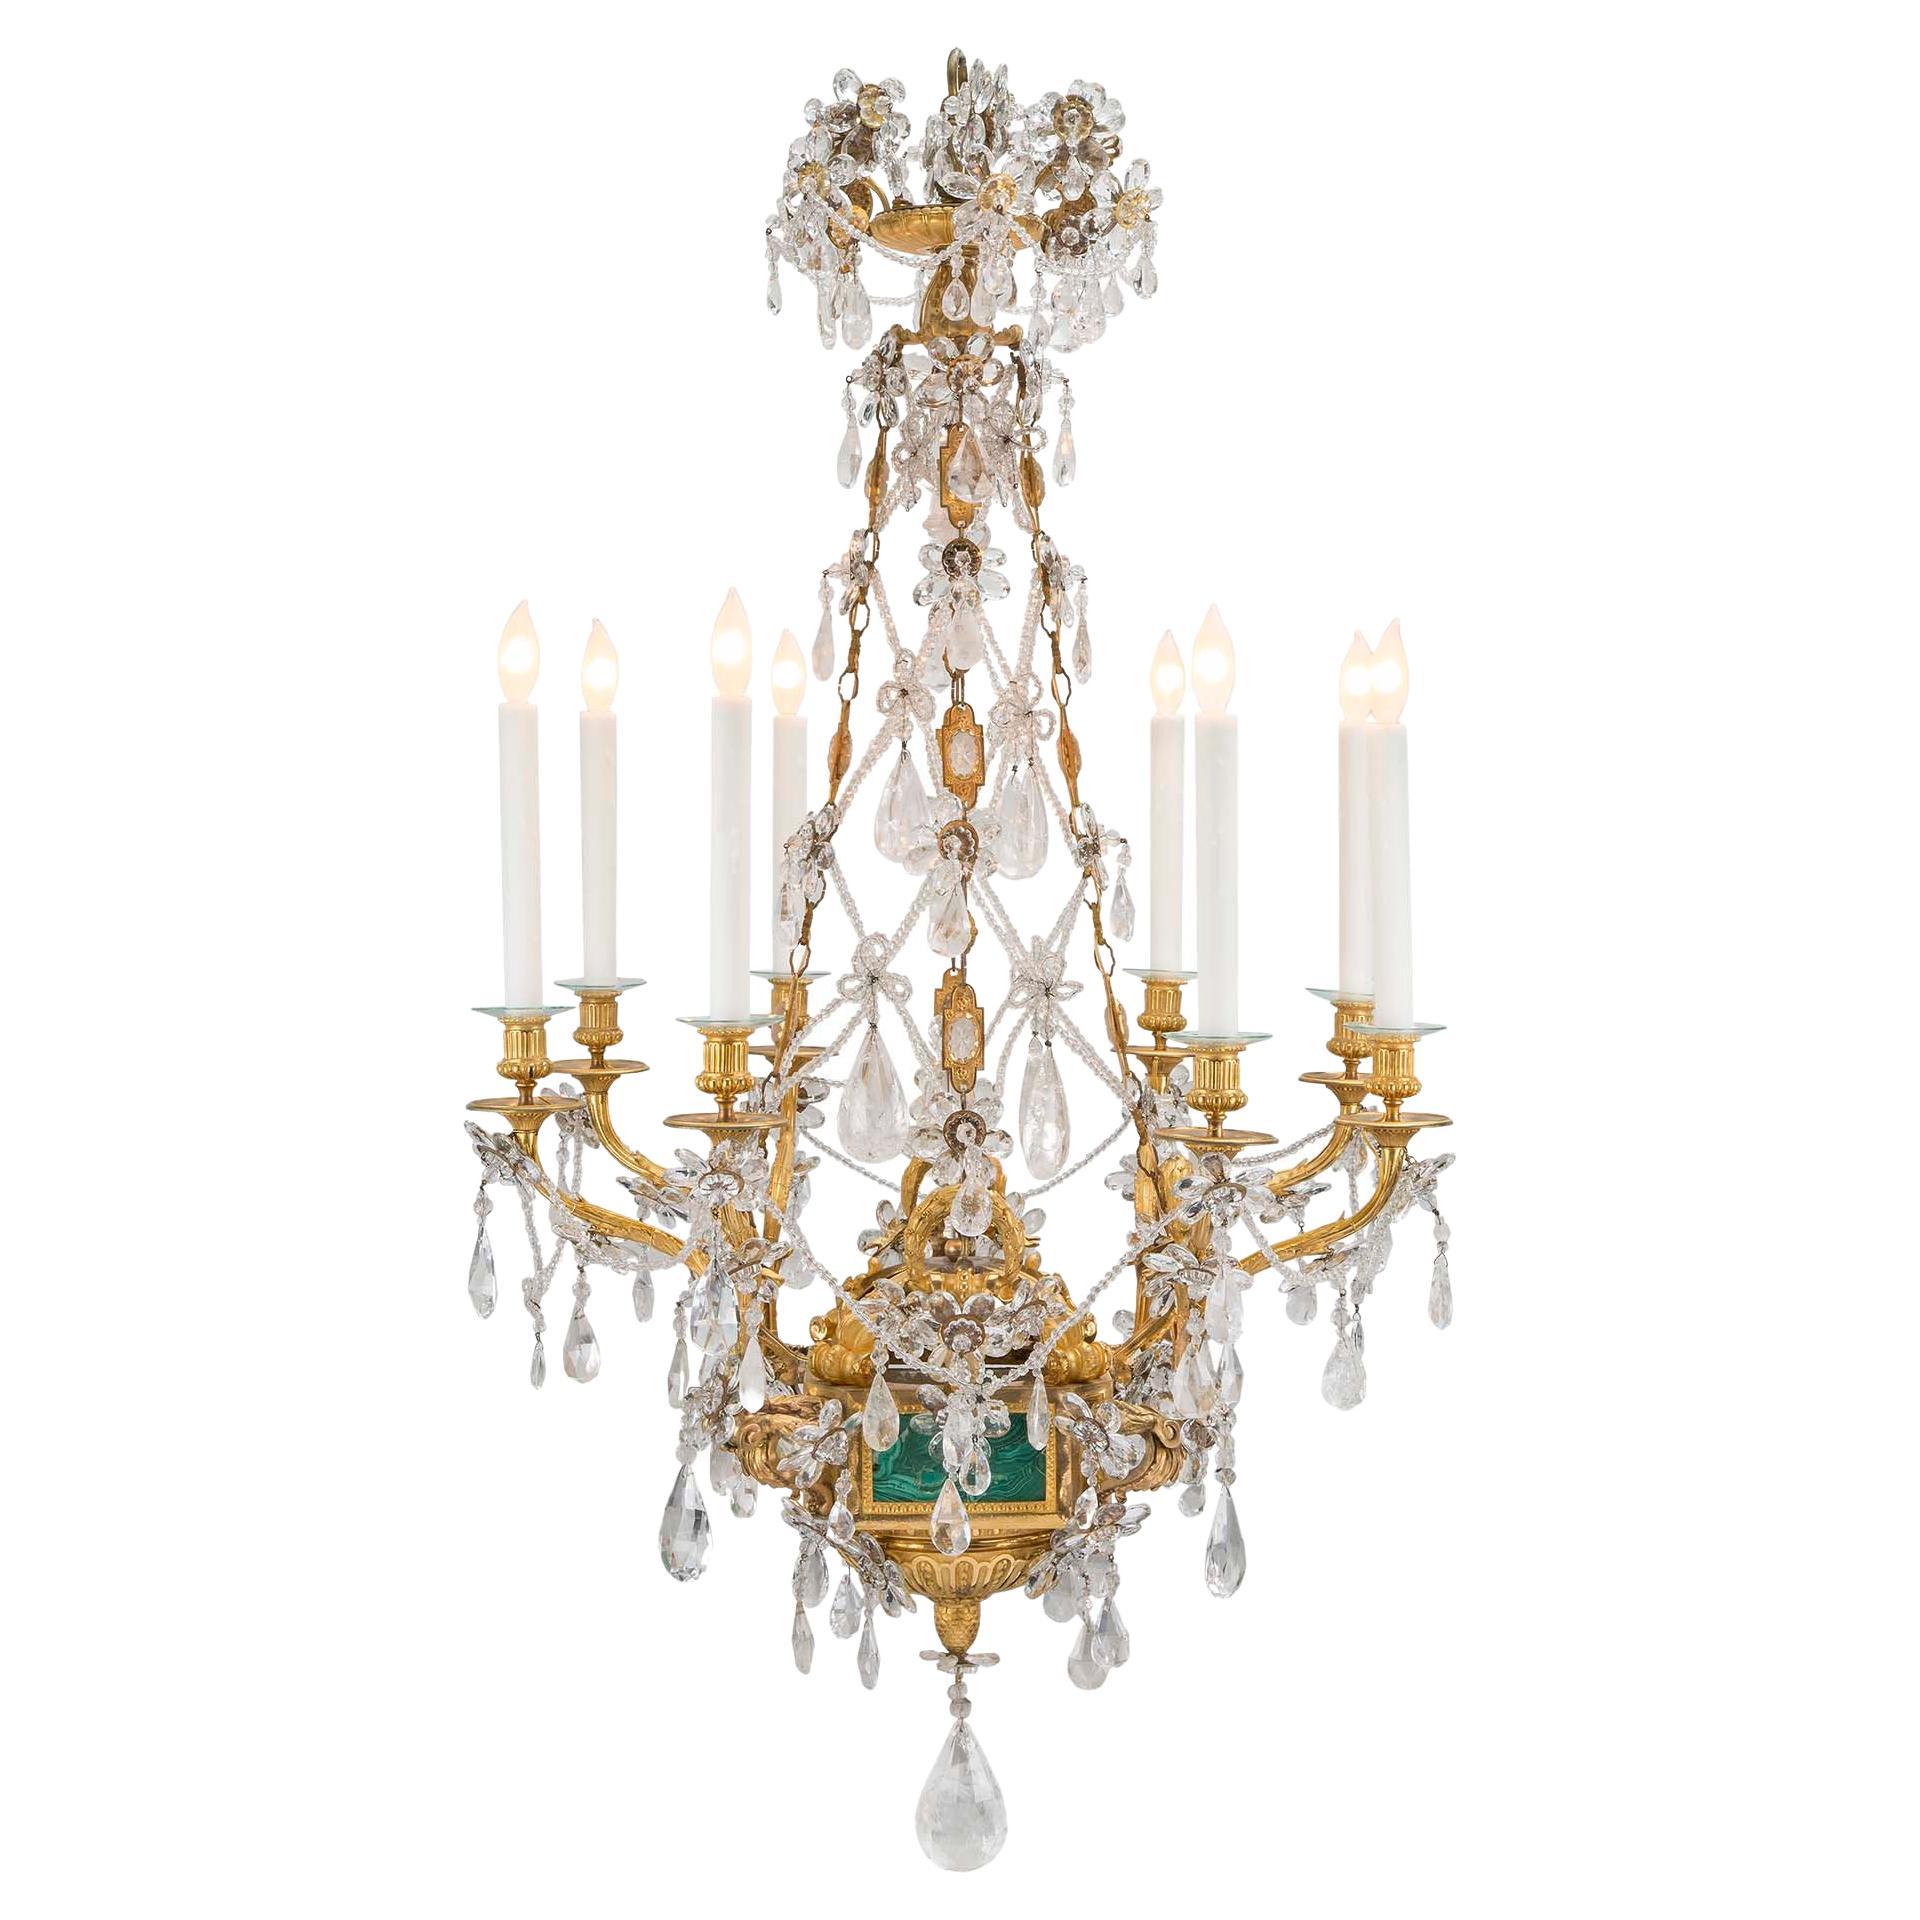  French Early 19th Century Louis XVI Style Eight-Arm Chandelier For Sale